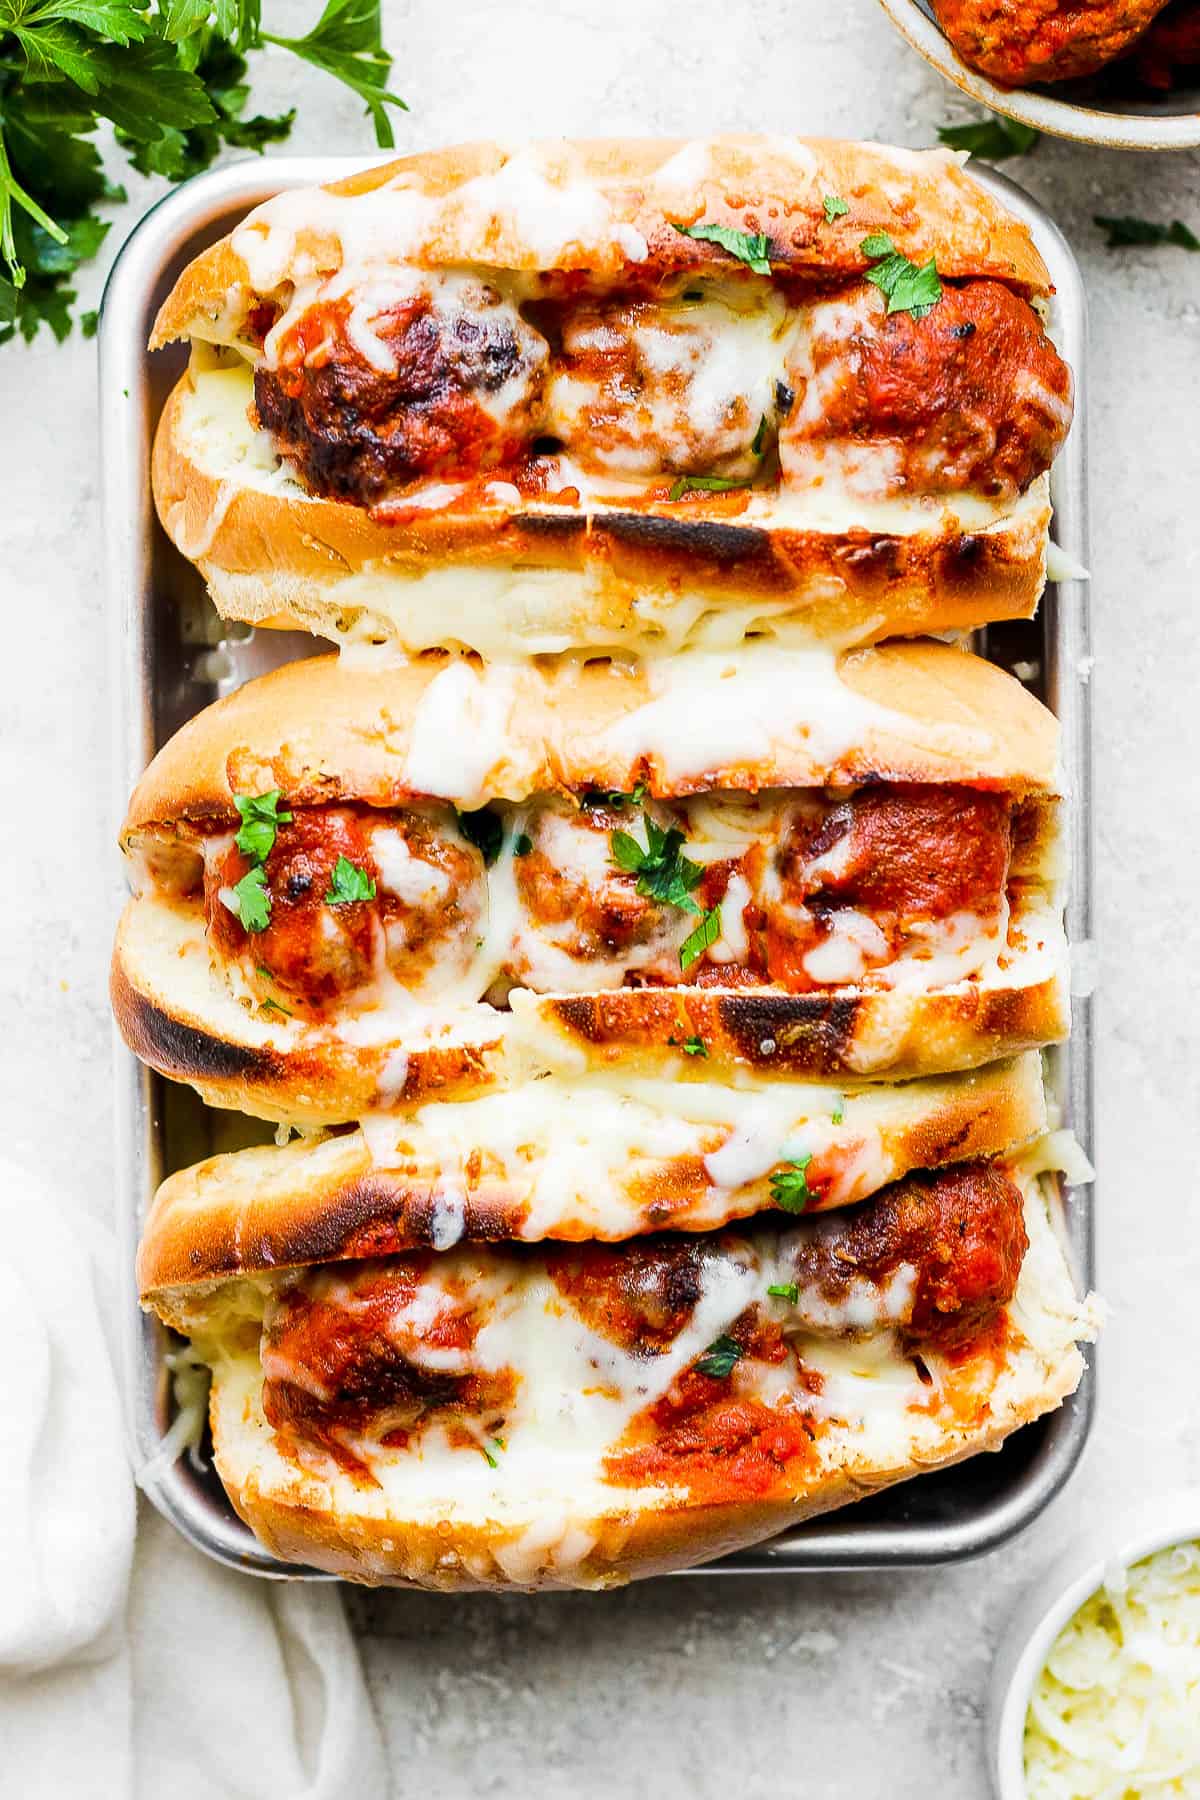 Three broiled meatball subs sprinkled with fresh parsley.